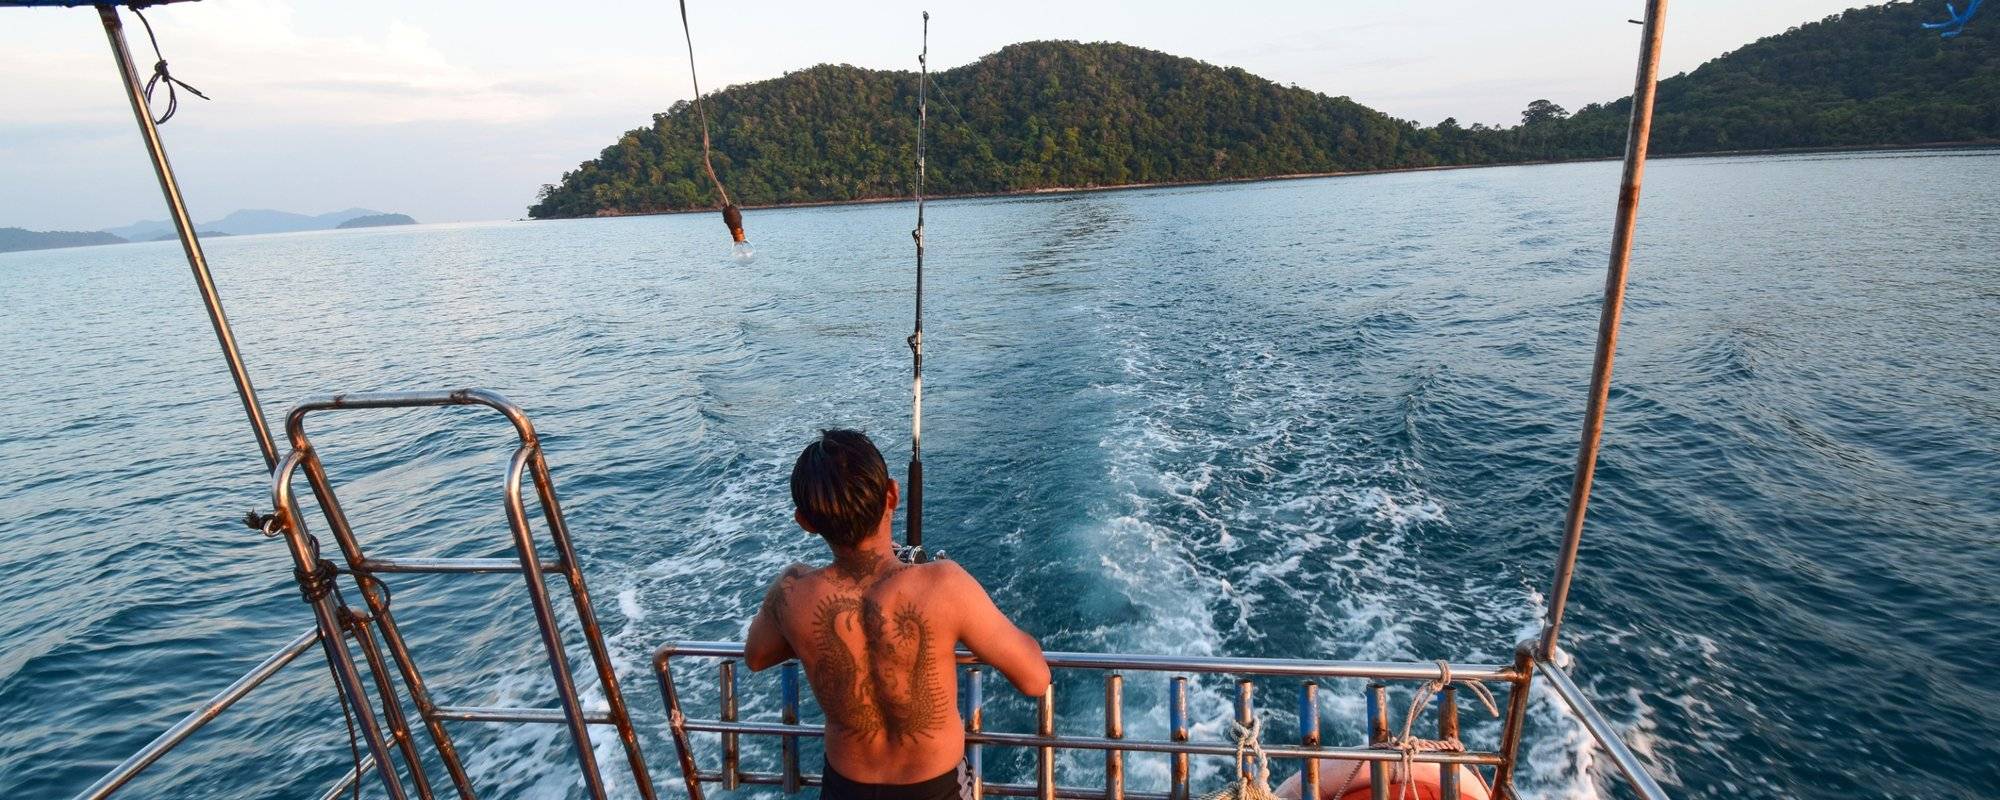 Eating Freshly Caught Fish in Koh Chang, Thailand - STEEMFest 4 - Boat Trip Sponsored by @threespeak